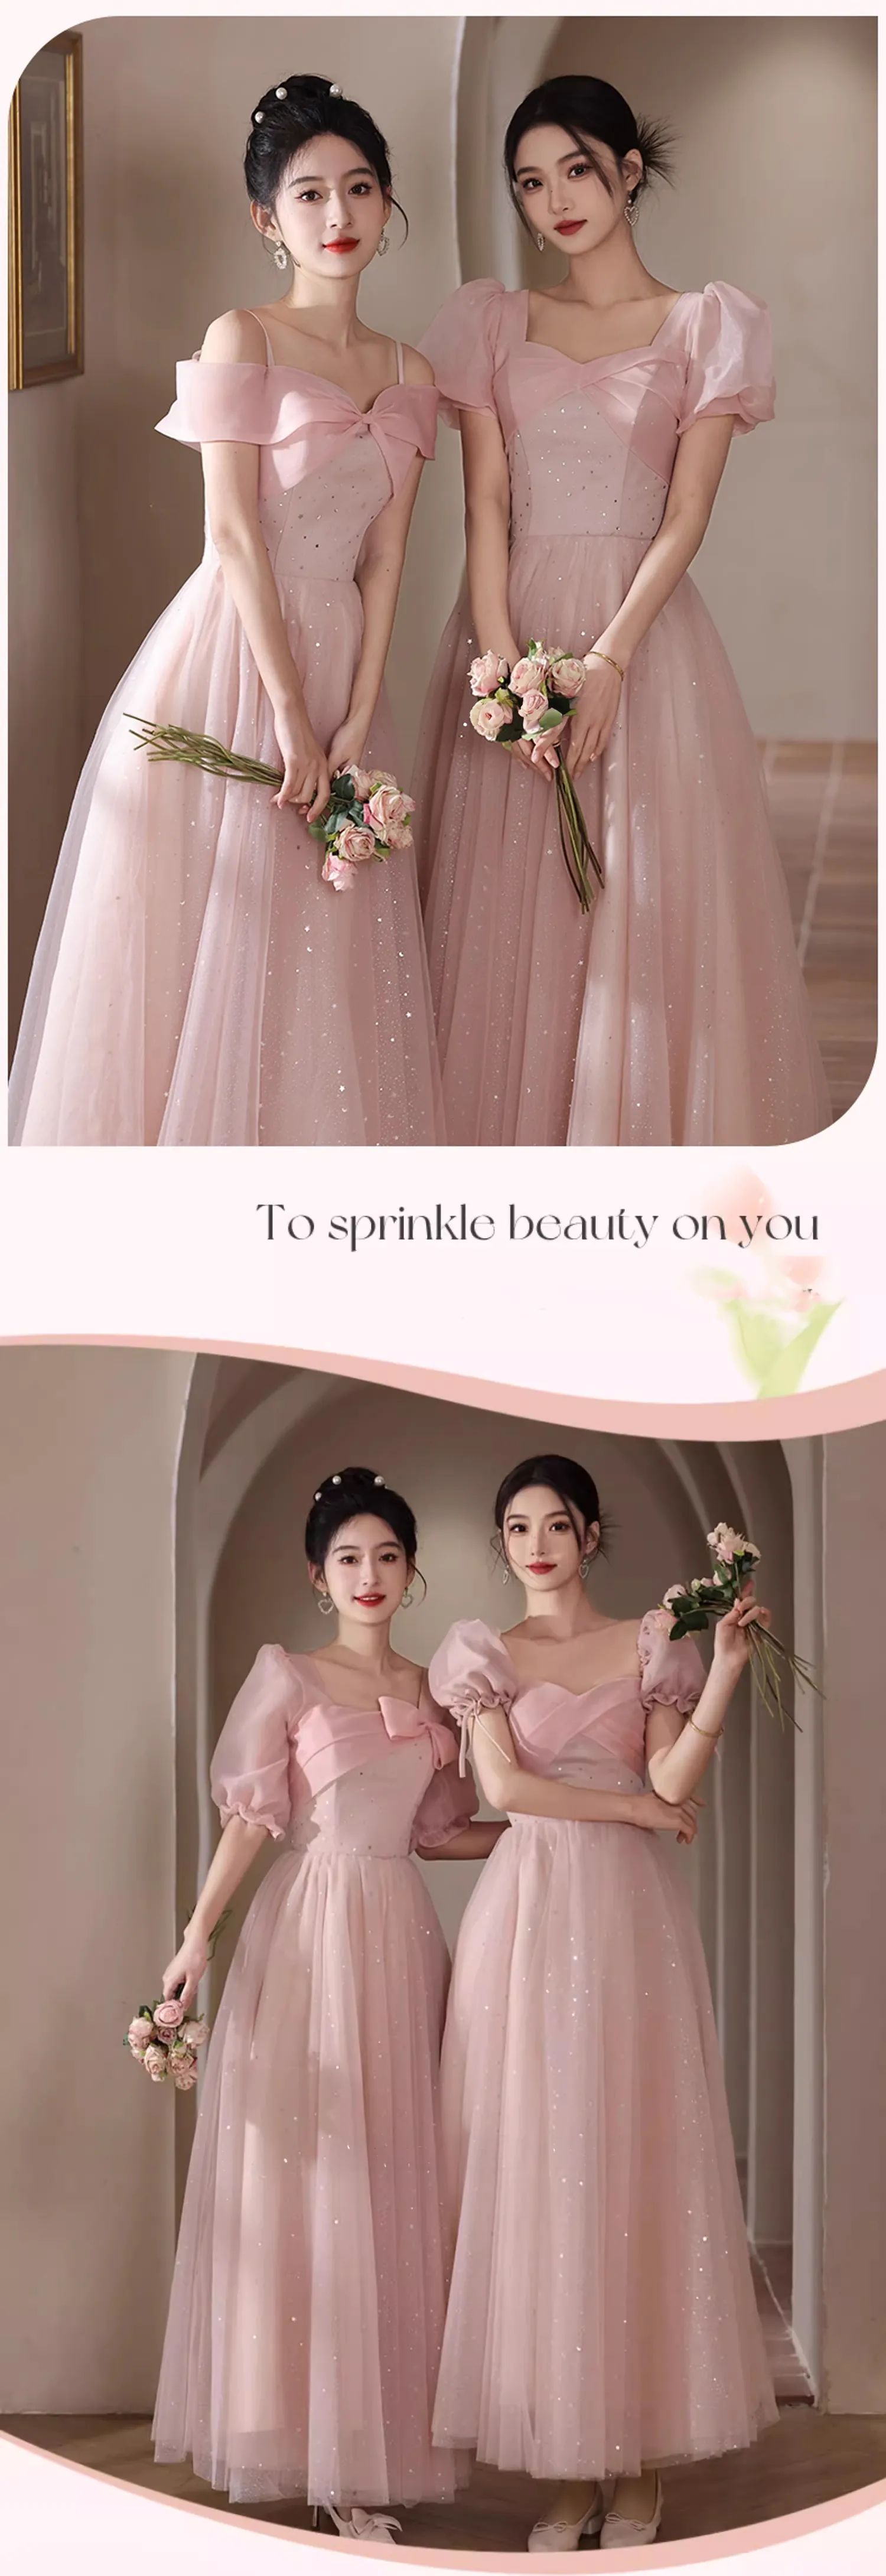 Sweet-Pink-Wedding-Guest-Bridesmaid-Cocktail-Formal-Party-Dress13